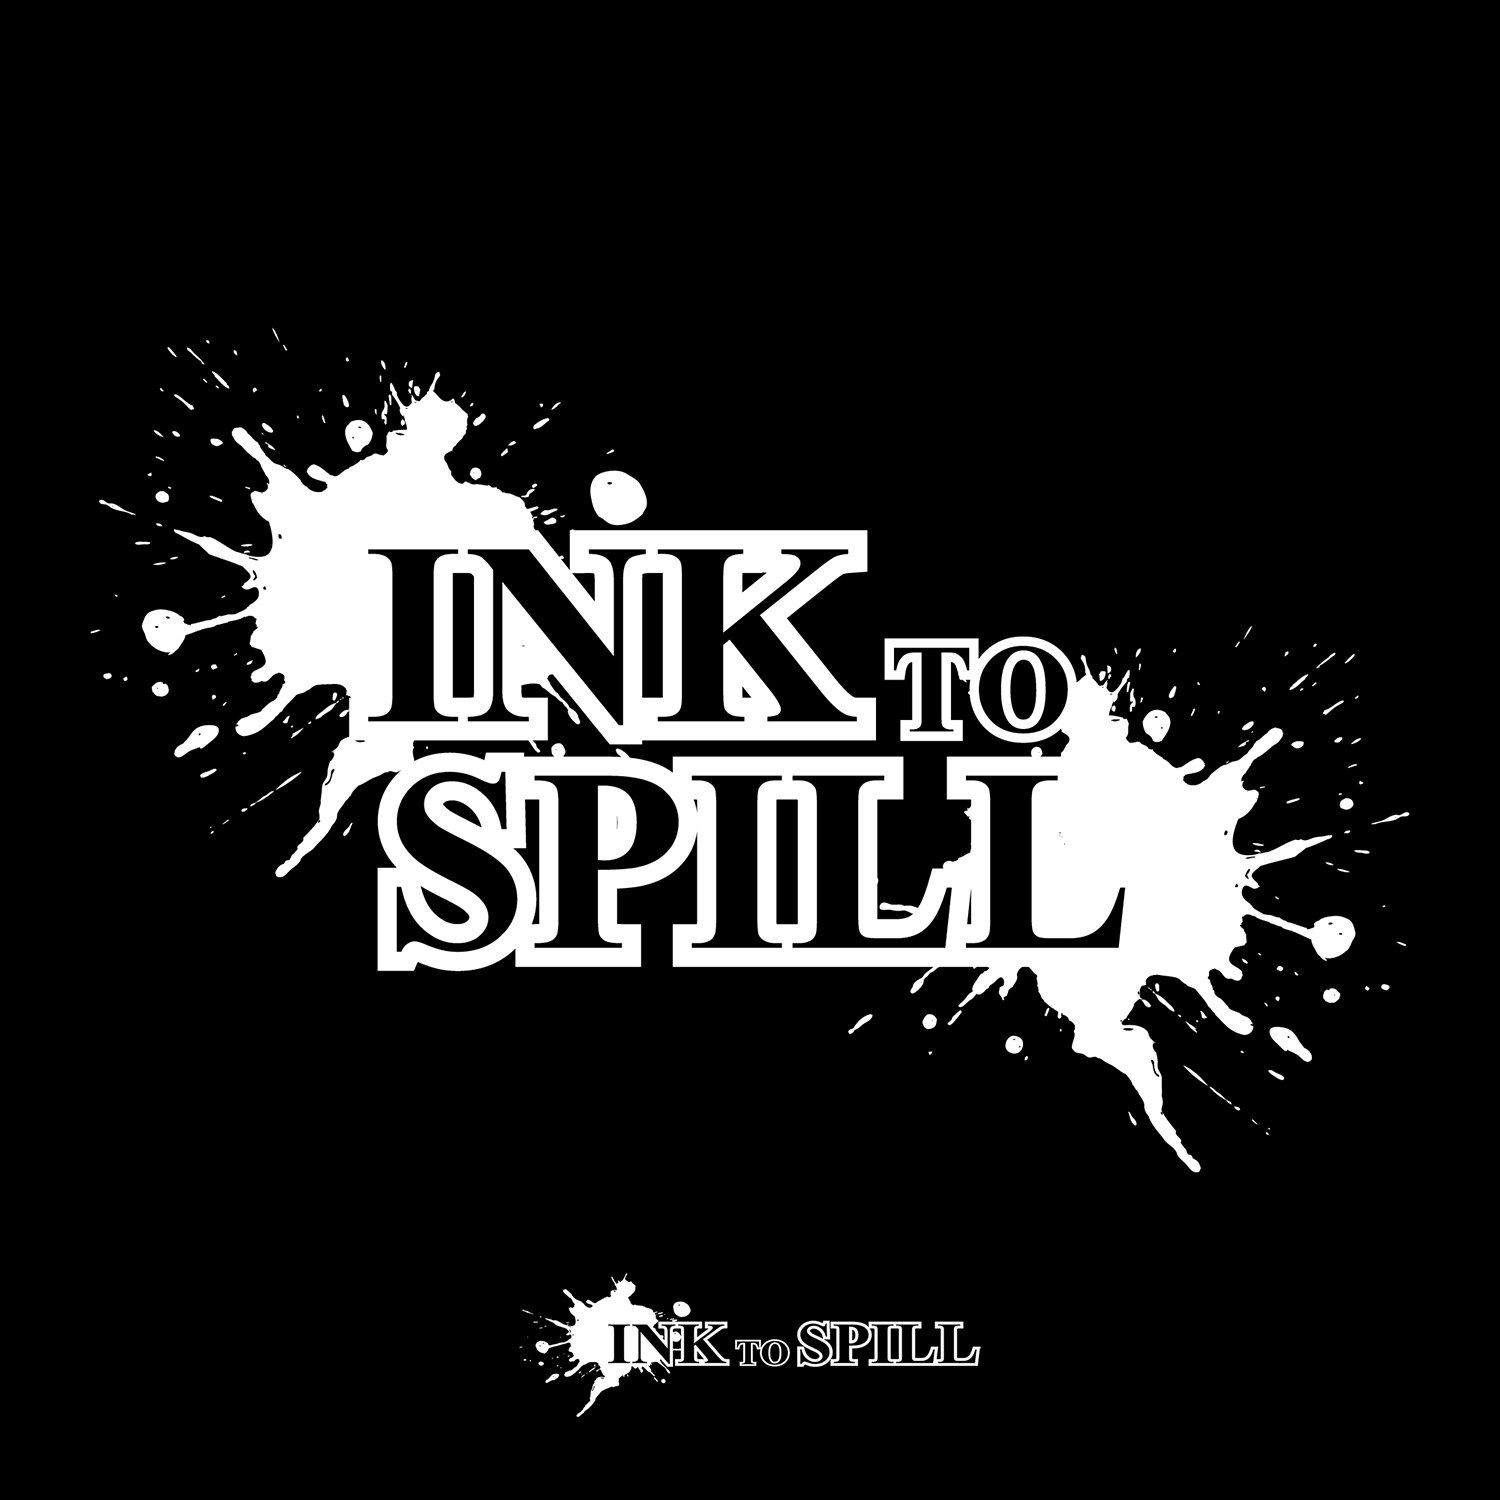 Ink to Spill its